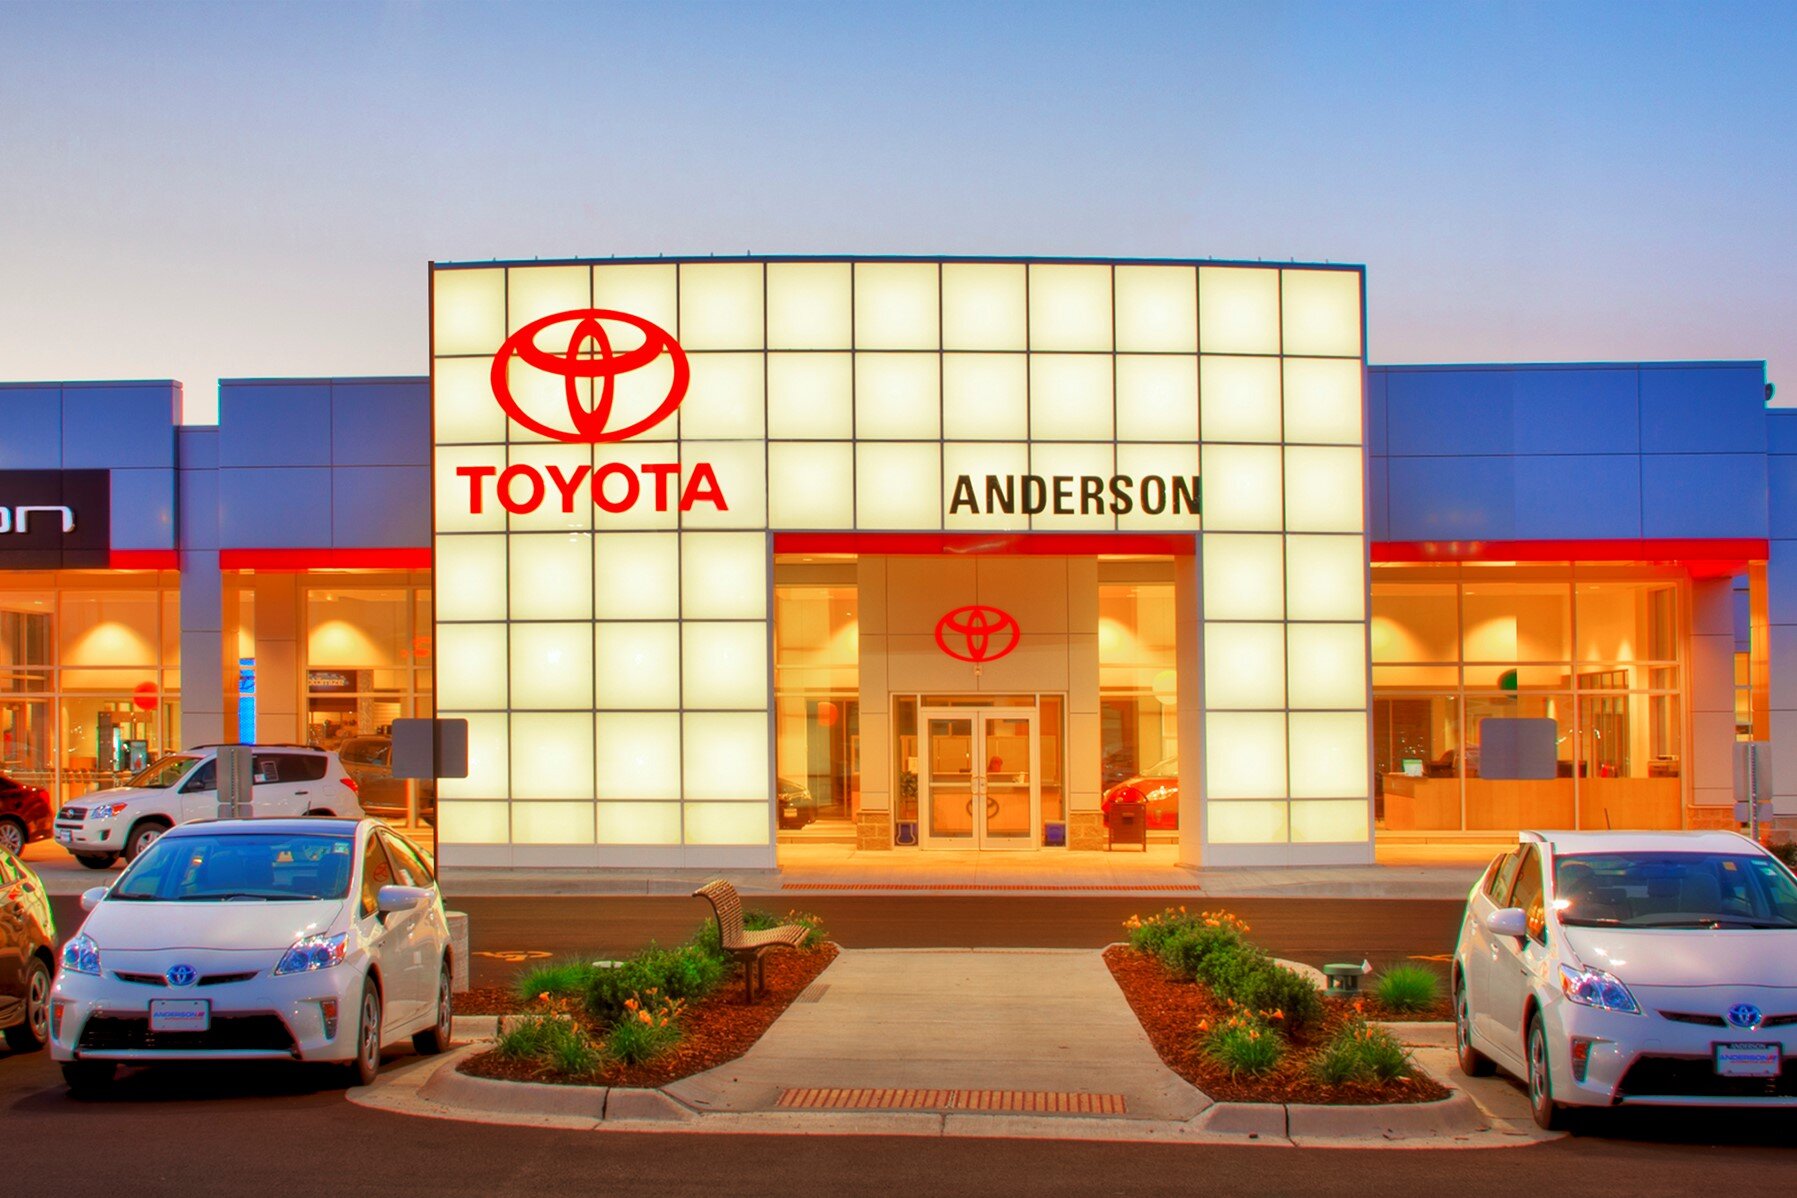 <span style="font-weight:bold"><p style="font-size:20px">Anderson Toyota-Lexus</p></span>Loves Park, Illinois